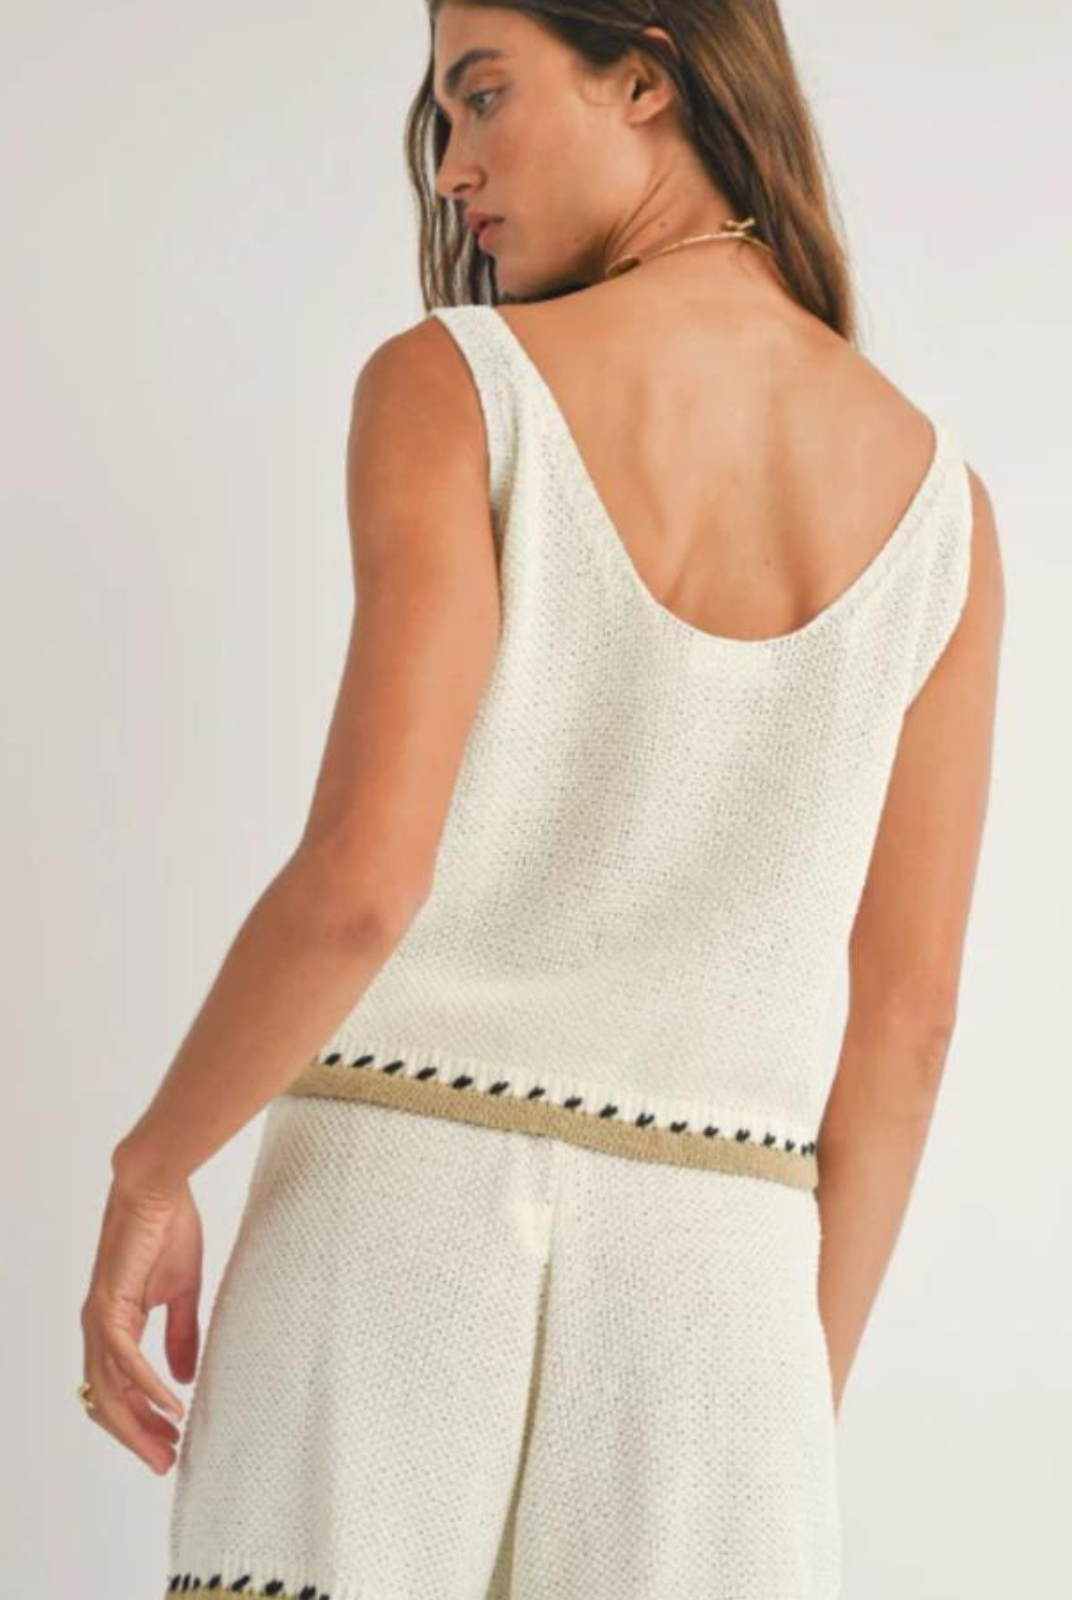 Sage The Label Rhode Sweater Tank. Upgrade your summer wardrobe with the Rhode Sweater Tank. This light weight, sleeveless tank features a scallop edge design and casual knit fabric. Pair it with the matching Rhode Knit Shorts for a complete look. Stay stylish and cool all season long!